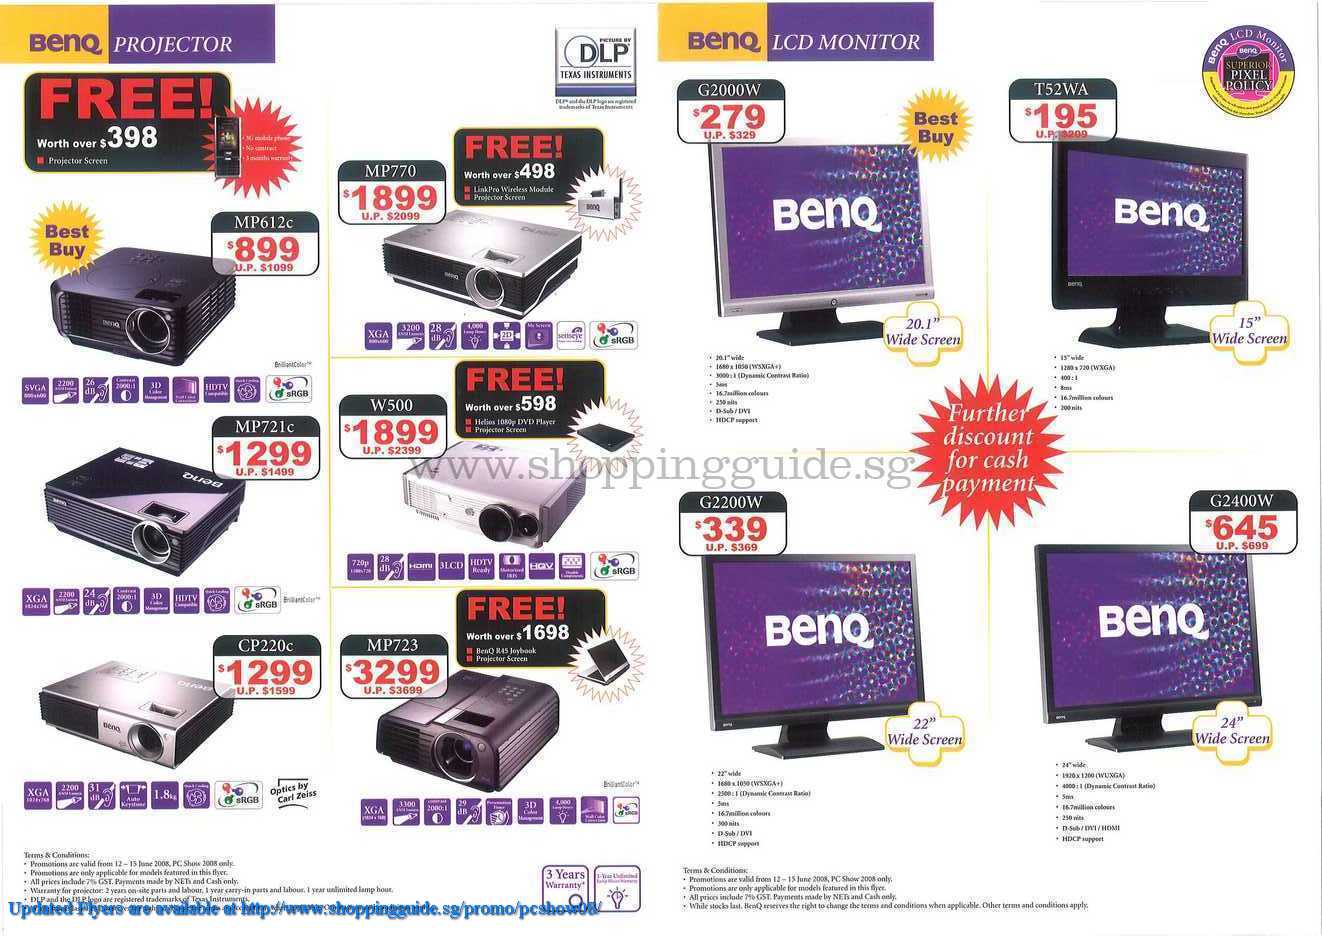 PC Show 2008 price list image brochure of Benq Projectors Lcd Monitors ShoppingGuide.SG-PcShow08-080